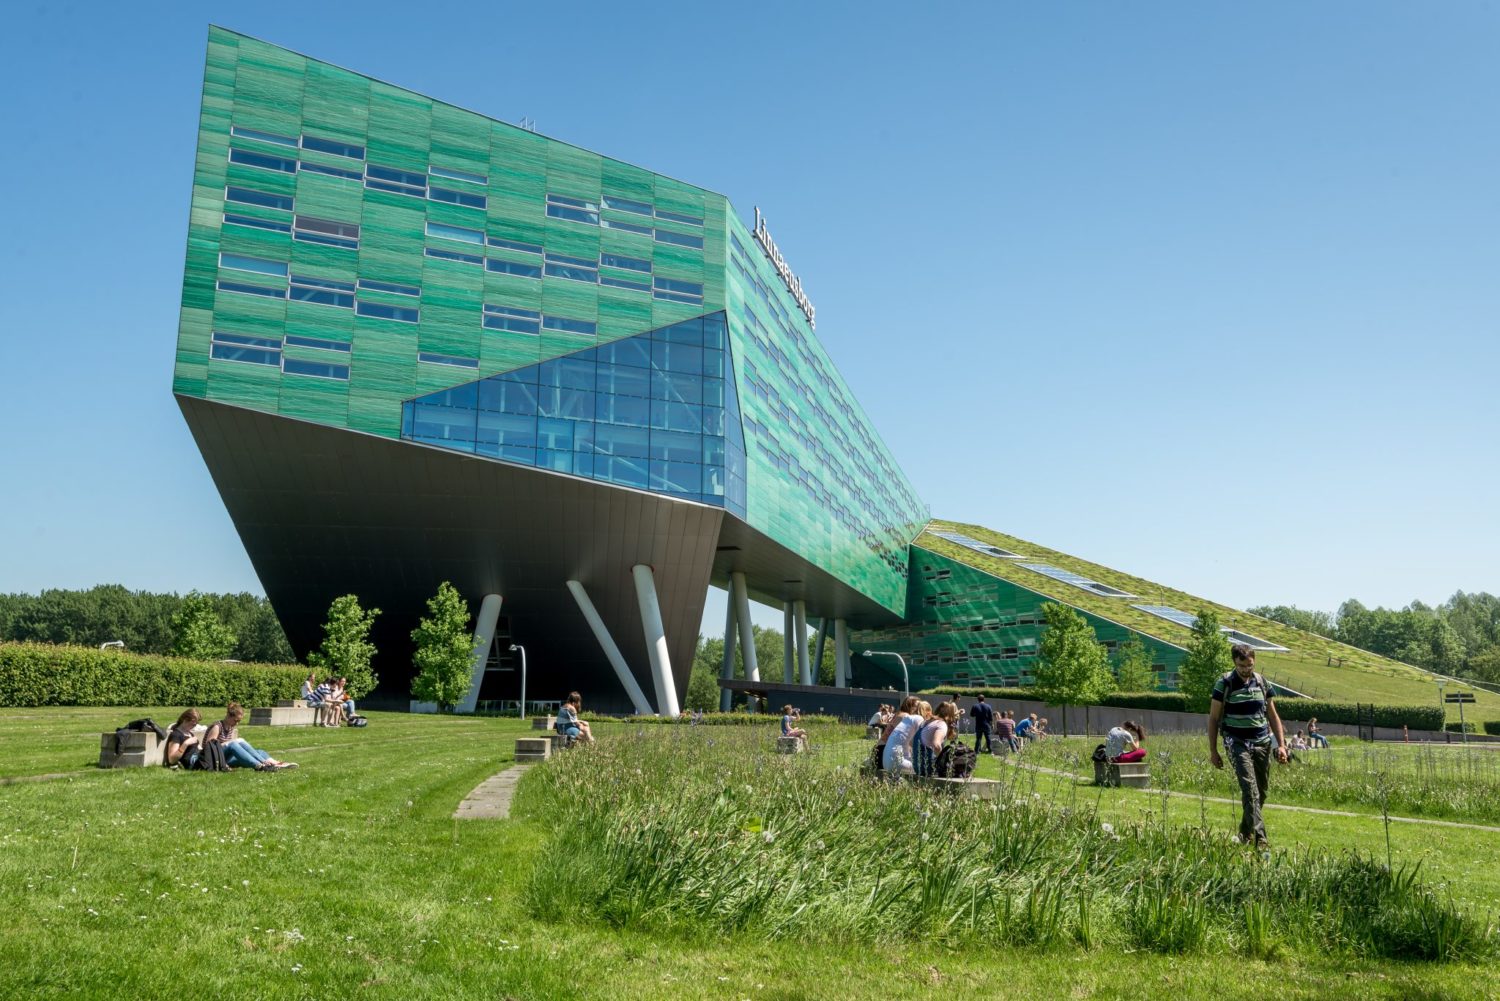 Groningen campus fastest growing campus in the Netherlands